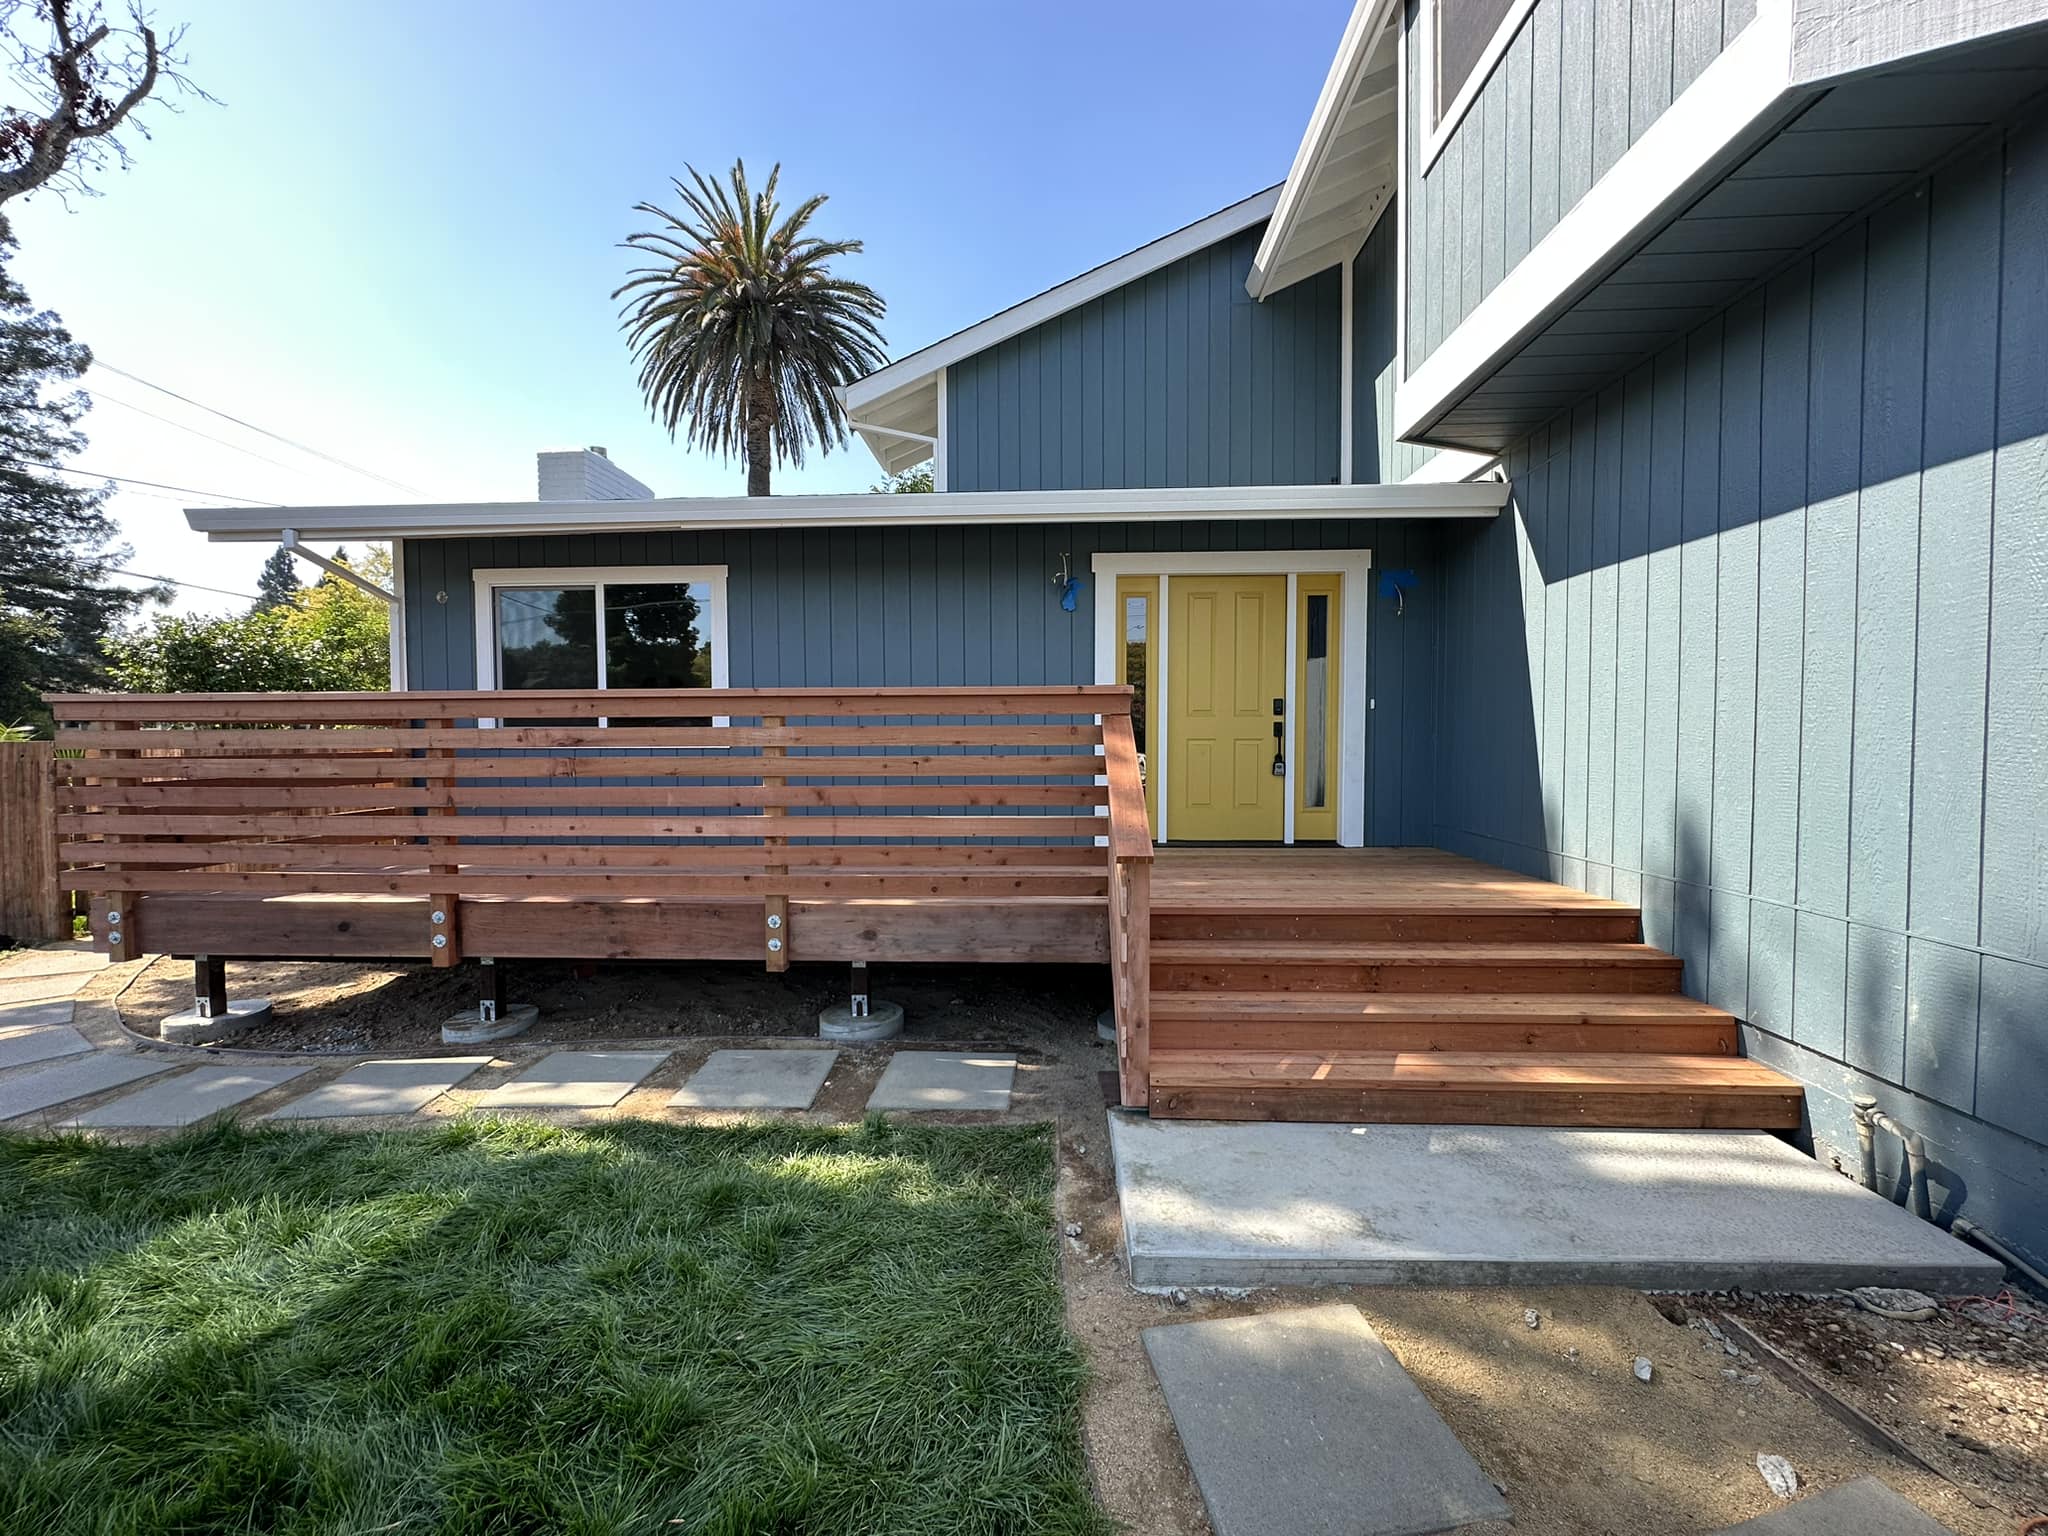 A deck wrapping around the side and front of a residential house.